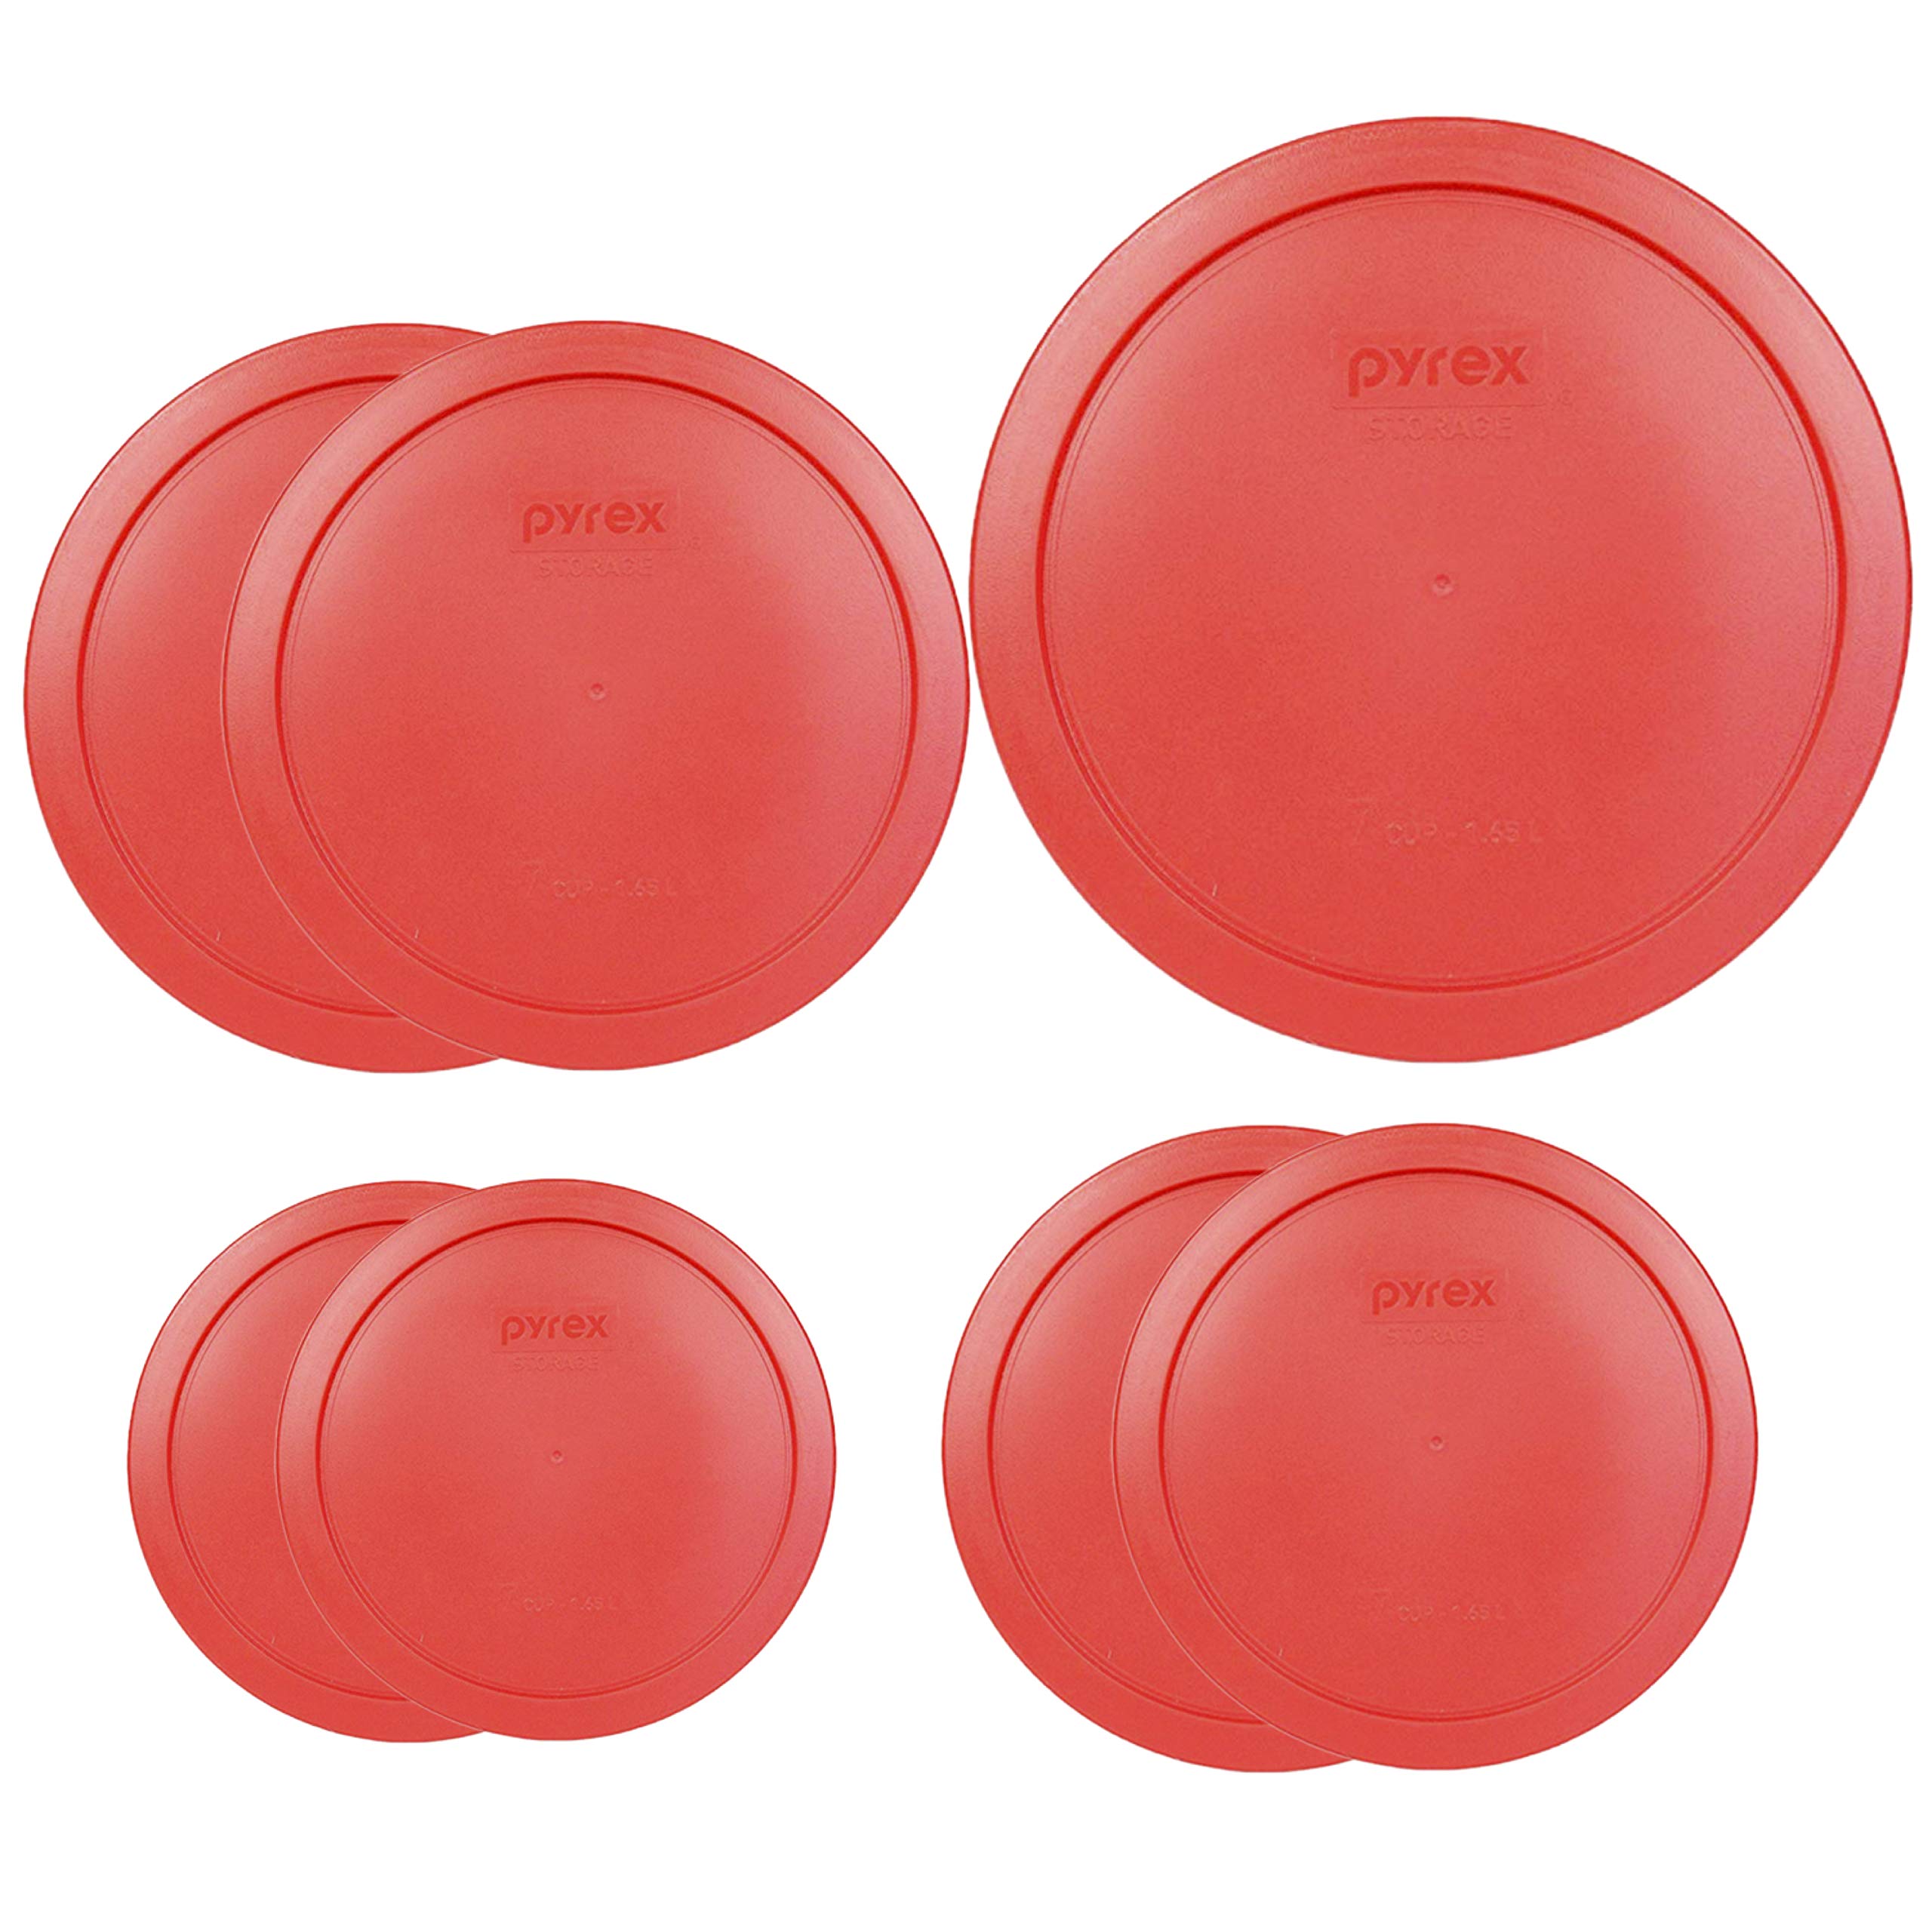 Pyrex Bundle - 7 Items: (1) 67-cup Red Lid, (2) 4-cup Red Lids, (2) 2-cup Red Lids, (2) 1-cup Red Lids Made in the USA